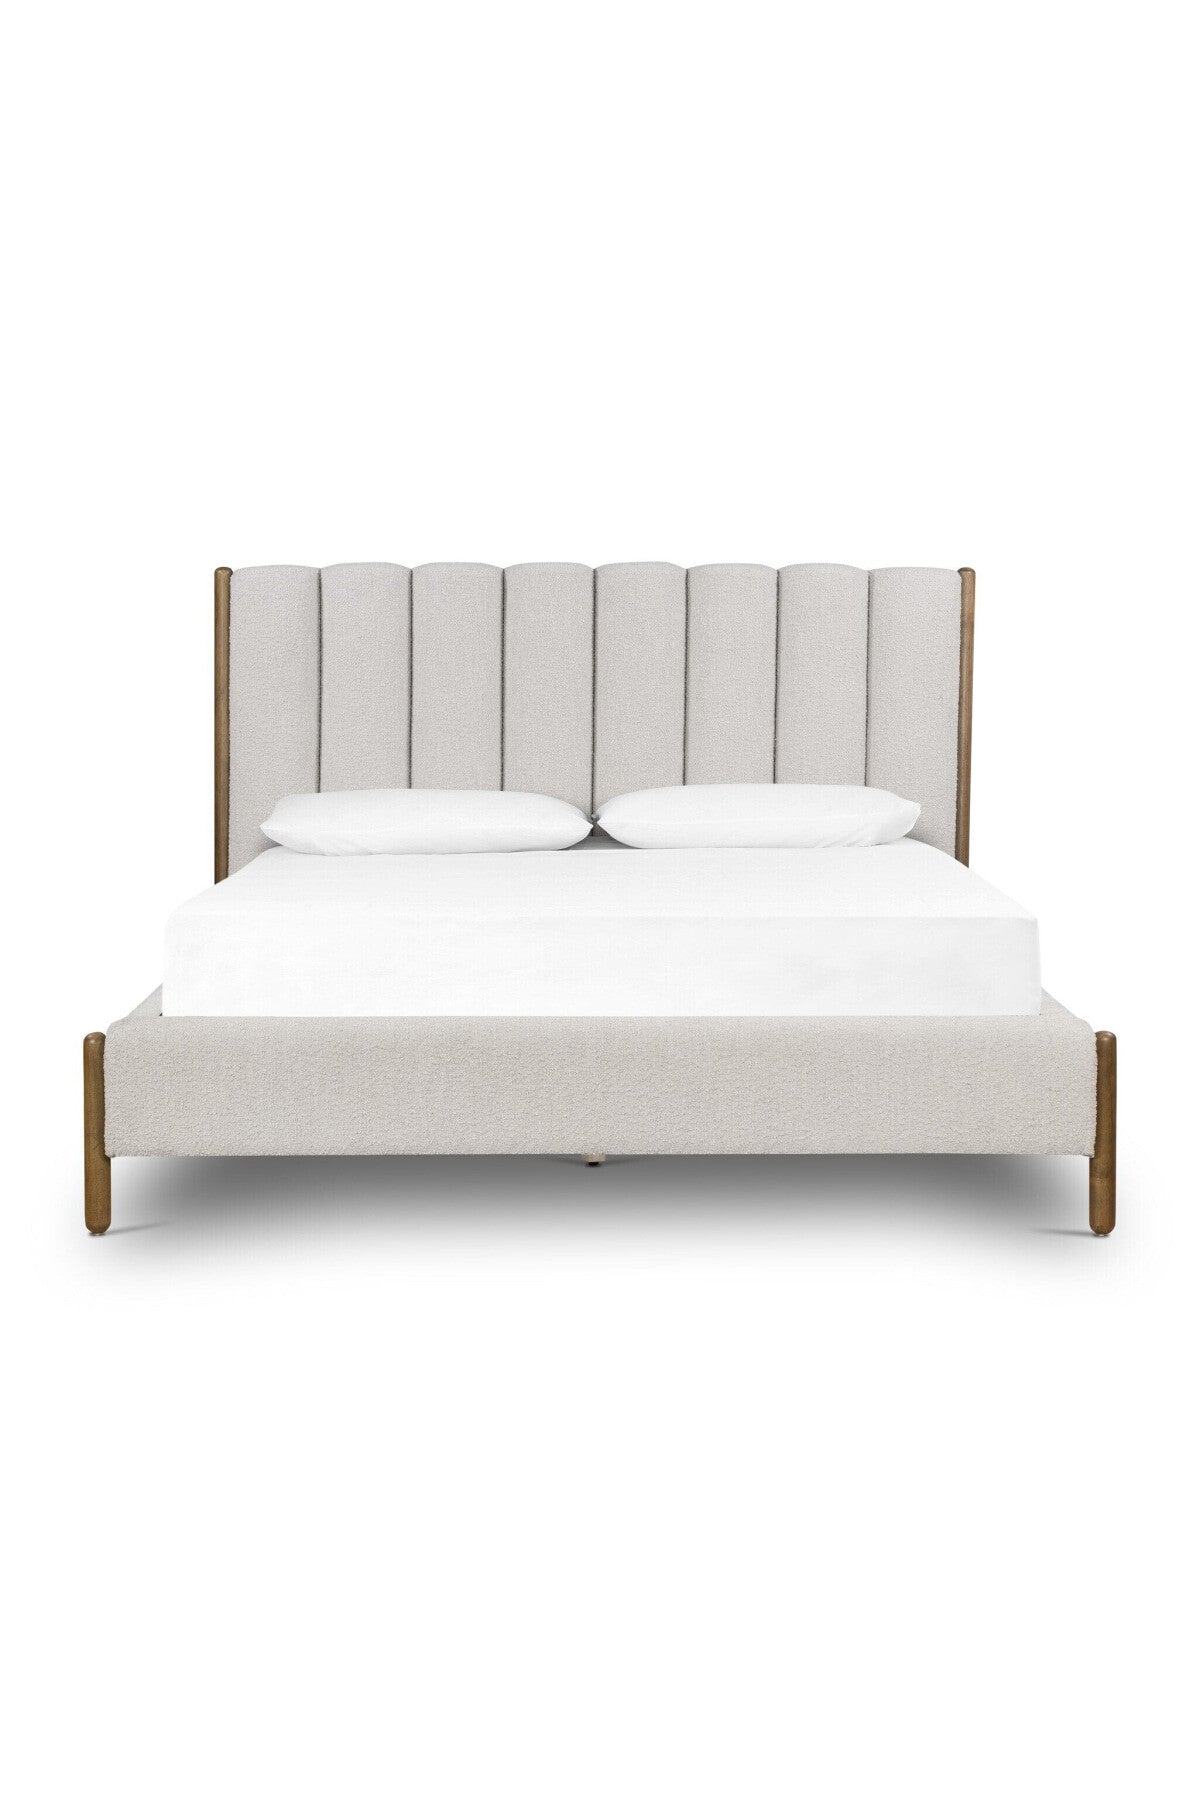 Emmaly Bed